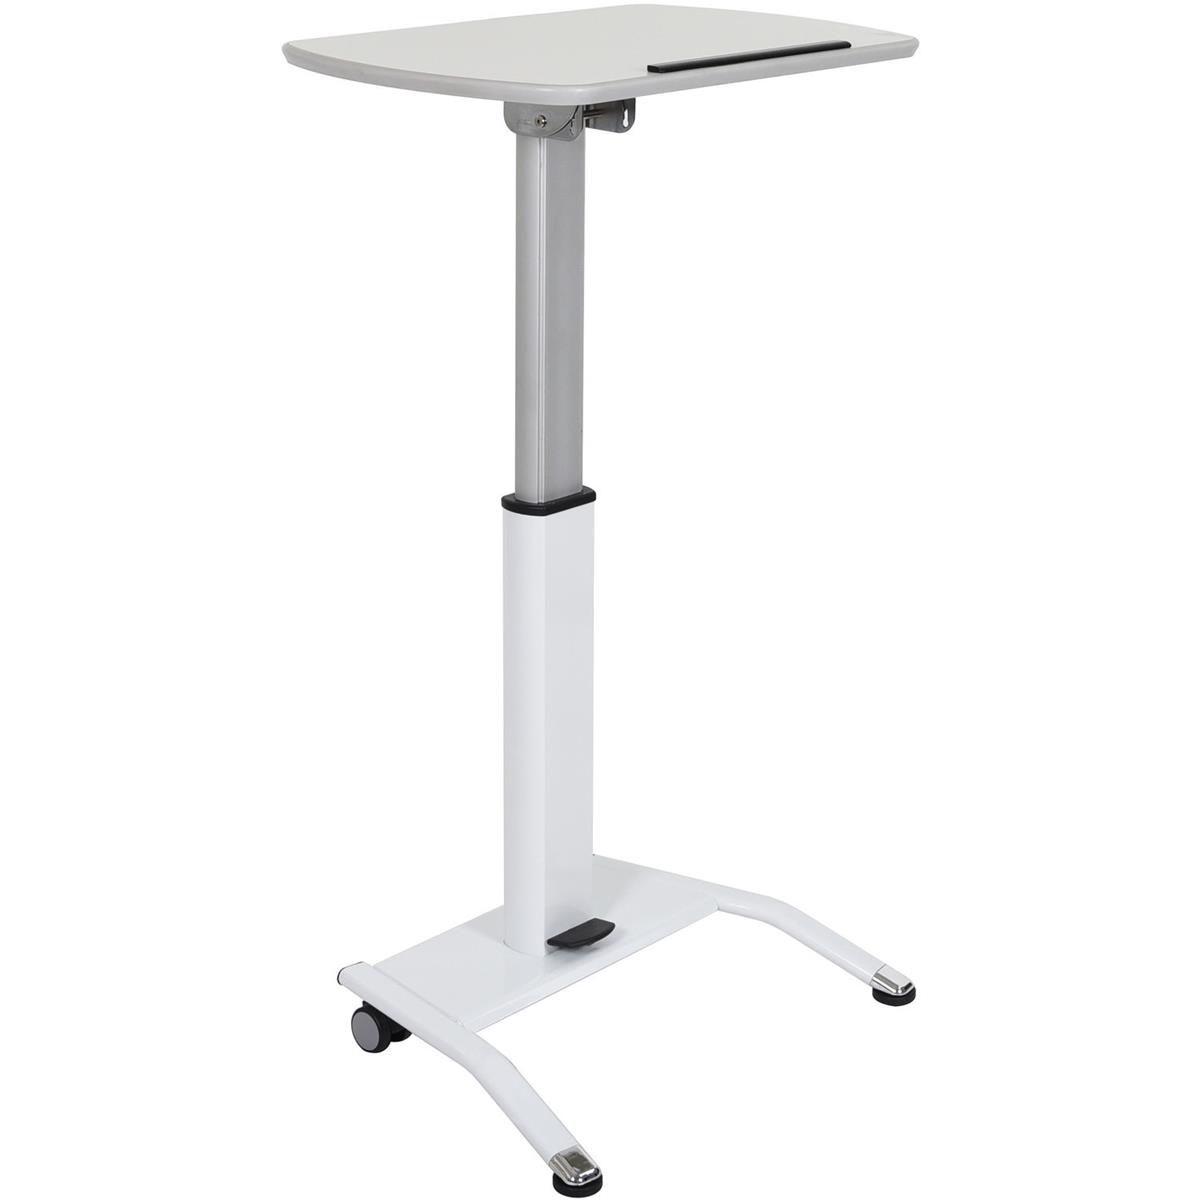 Image of Luxor Pneumatic Adjustable Height Lectern